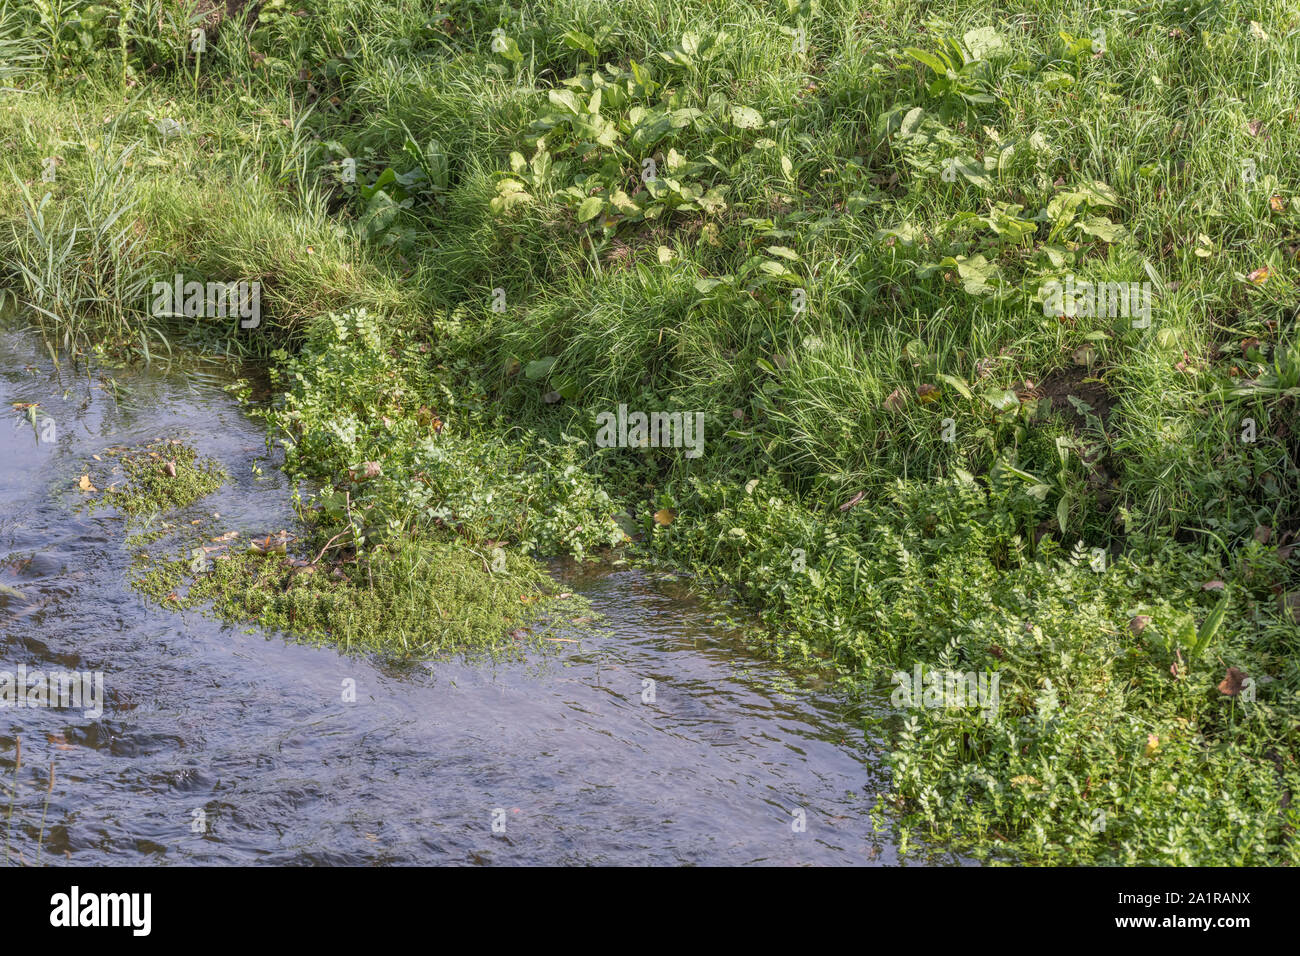 Mass of submerged aquatic weeds in a Cornwall drainage channel. Metaphor blocked, blockage, waterway management, among the weeds. Stock Photo